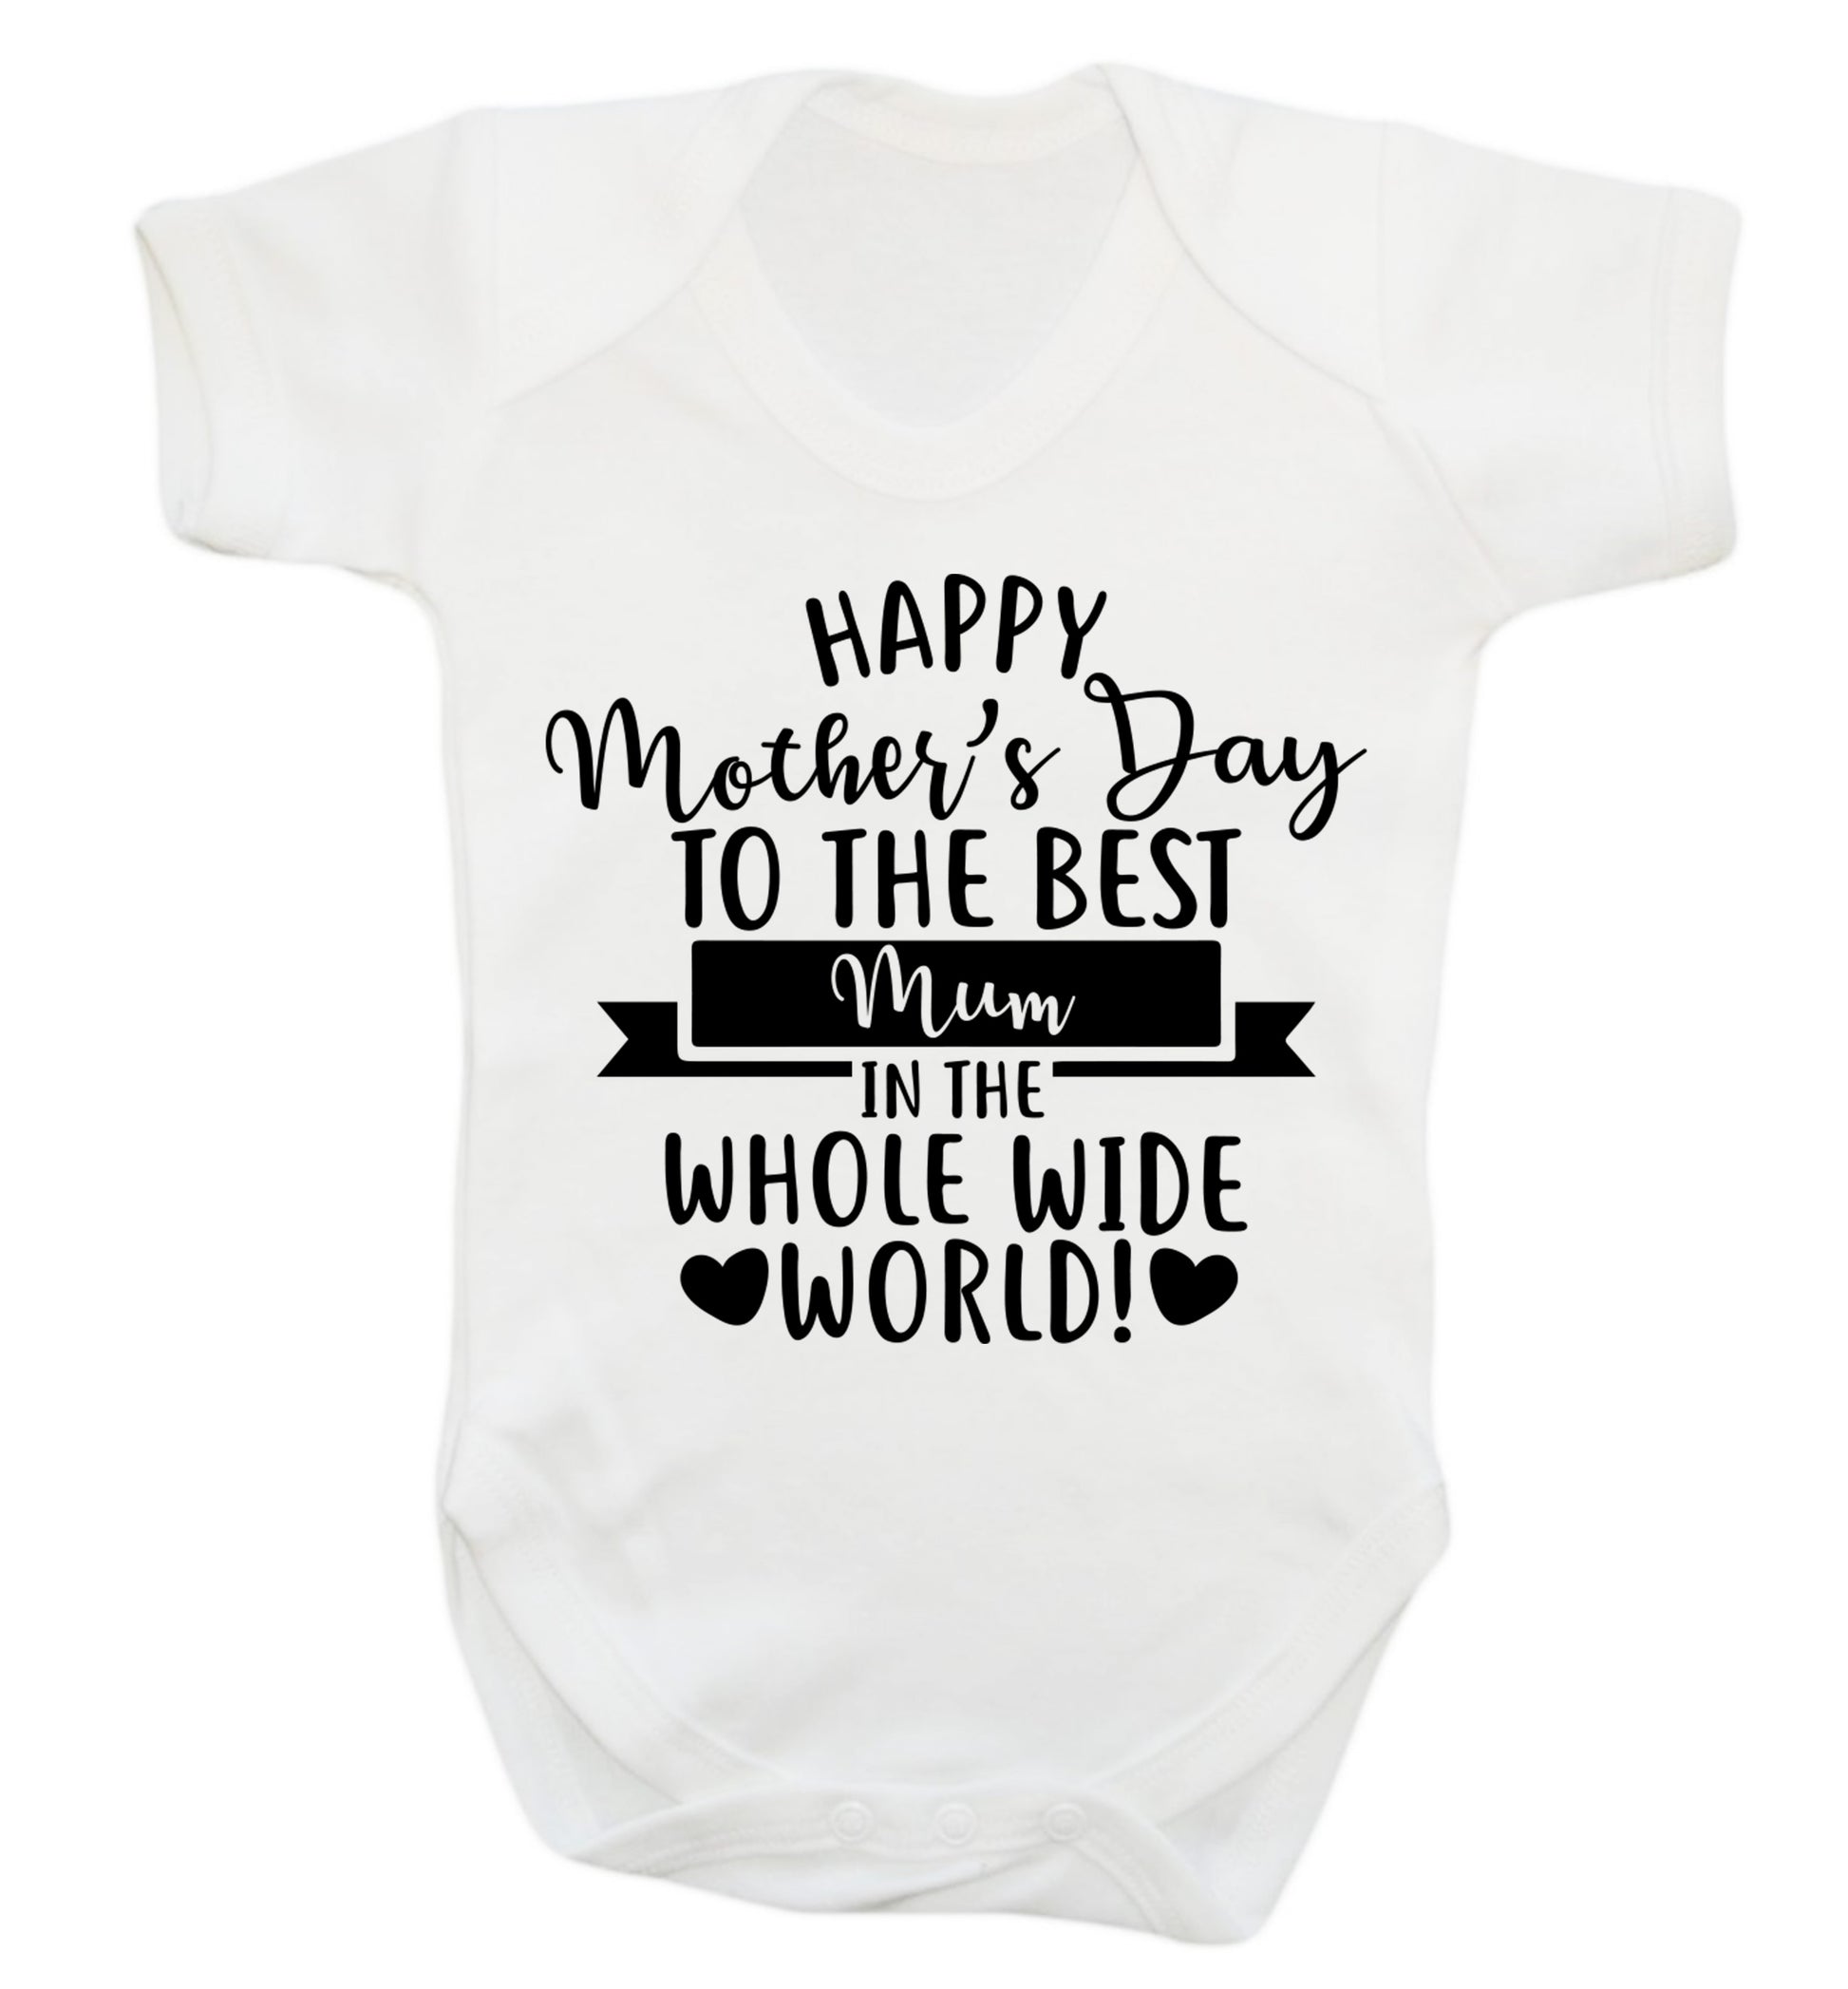 Happy Mother's Day to the best mum in the whole wide world! Baby Vest white 18-24 months